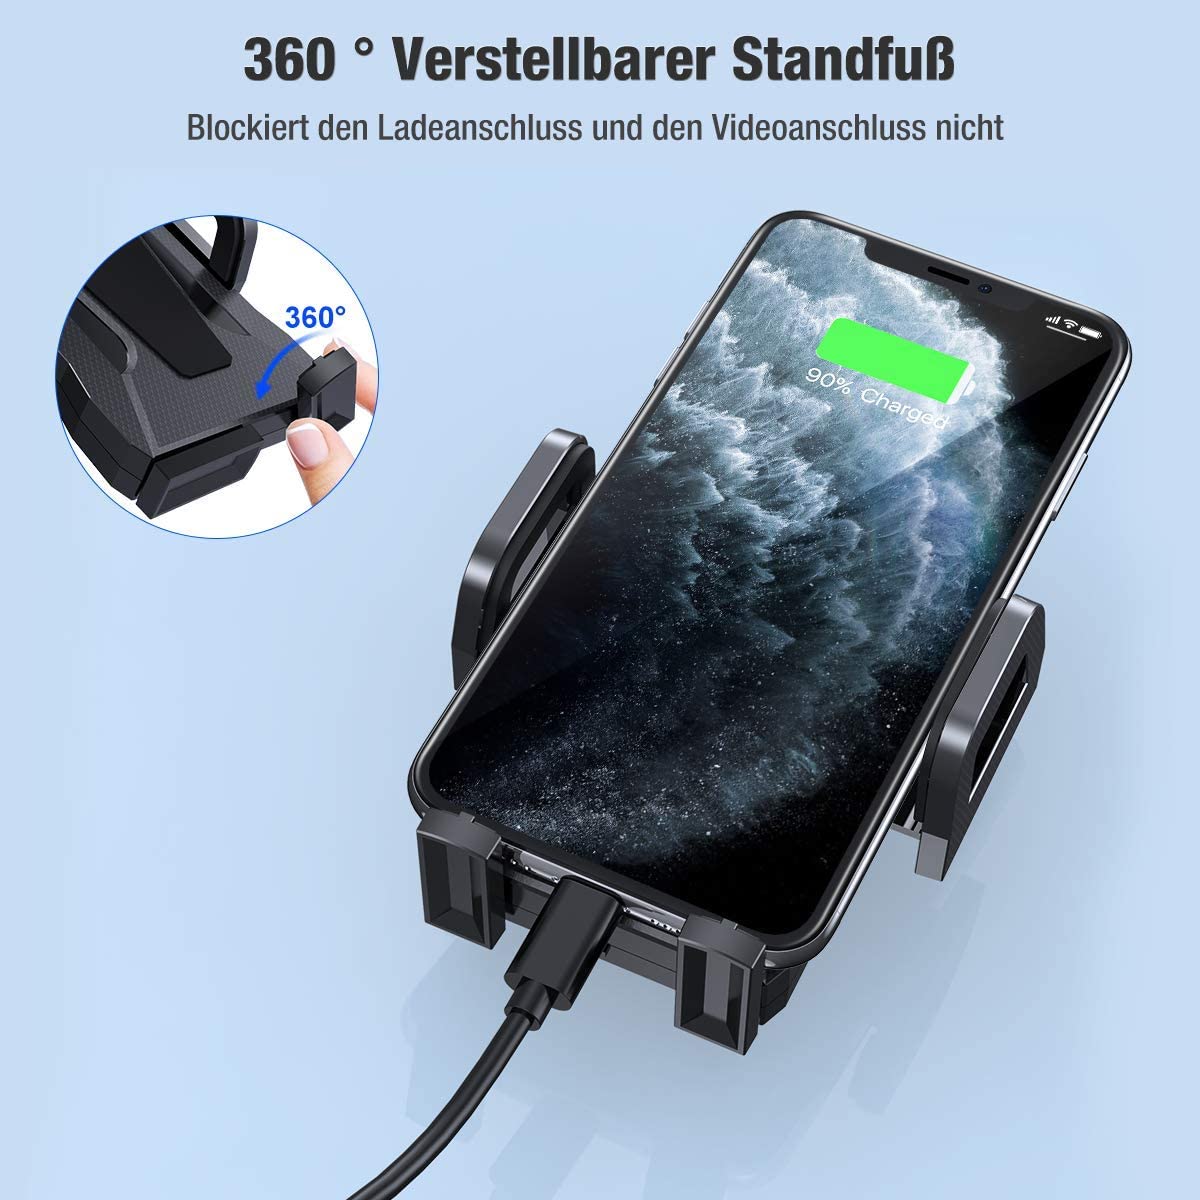 Miracase mobile phone holder car mobile phone holder for the car with suction cup Universal car smartphone holder dashboard mobile phone holder for iPhone SE 2020/11 / Samsung S20 / S10 / Note10